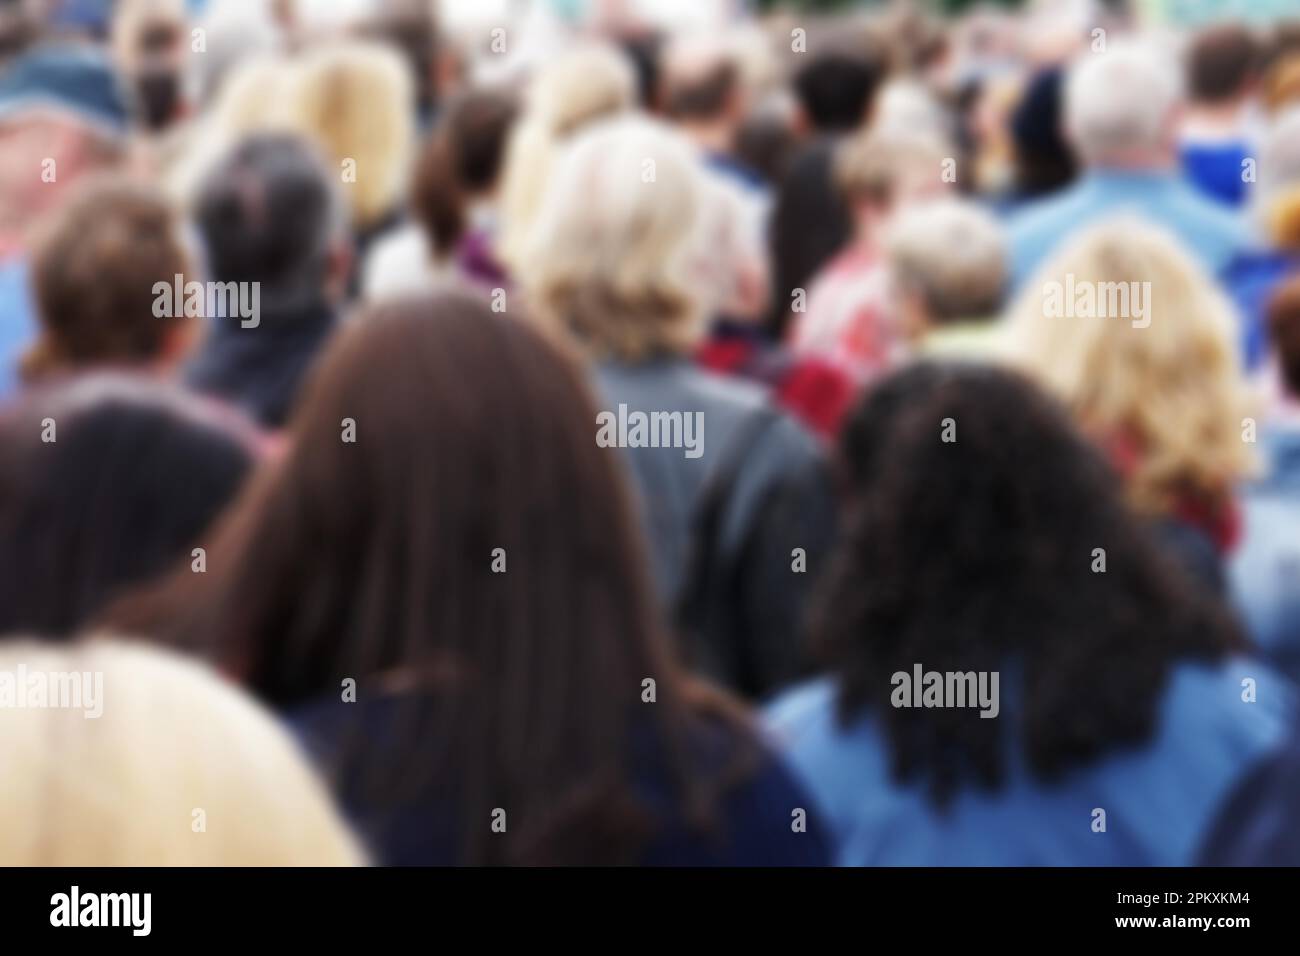 blurred rear view of anonymous crowd of people Stock Photo